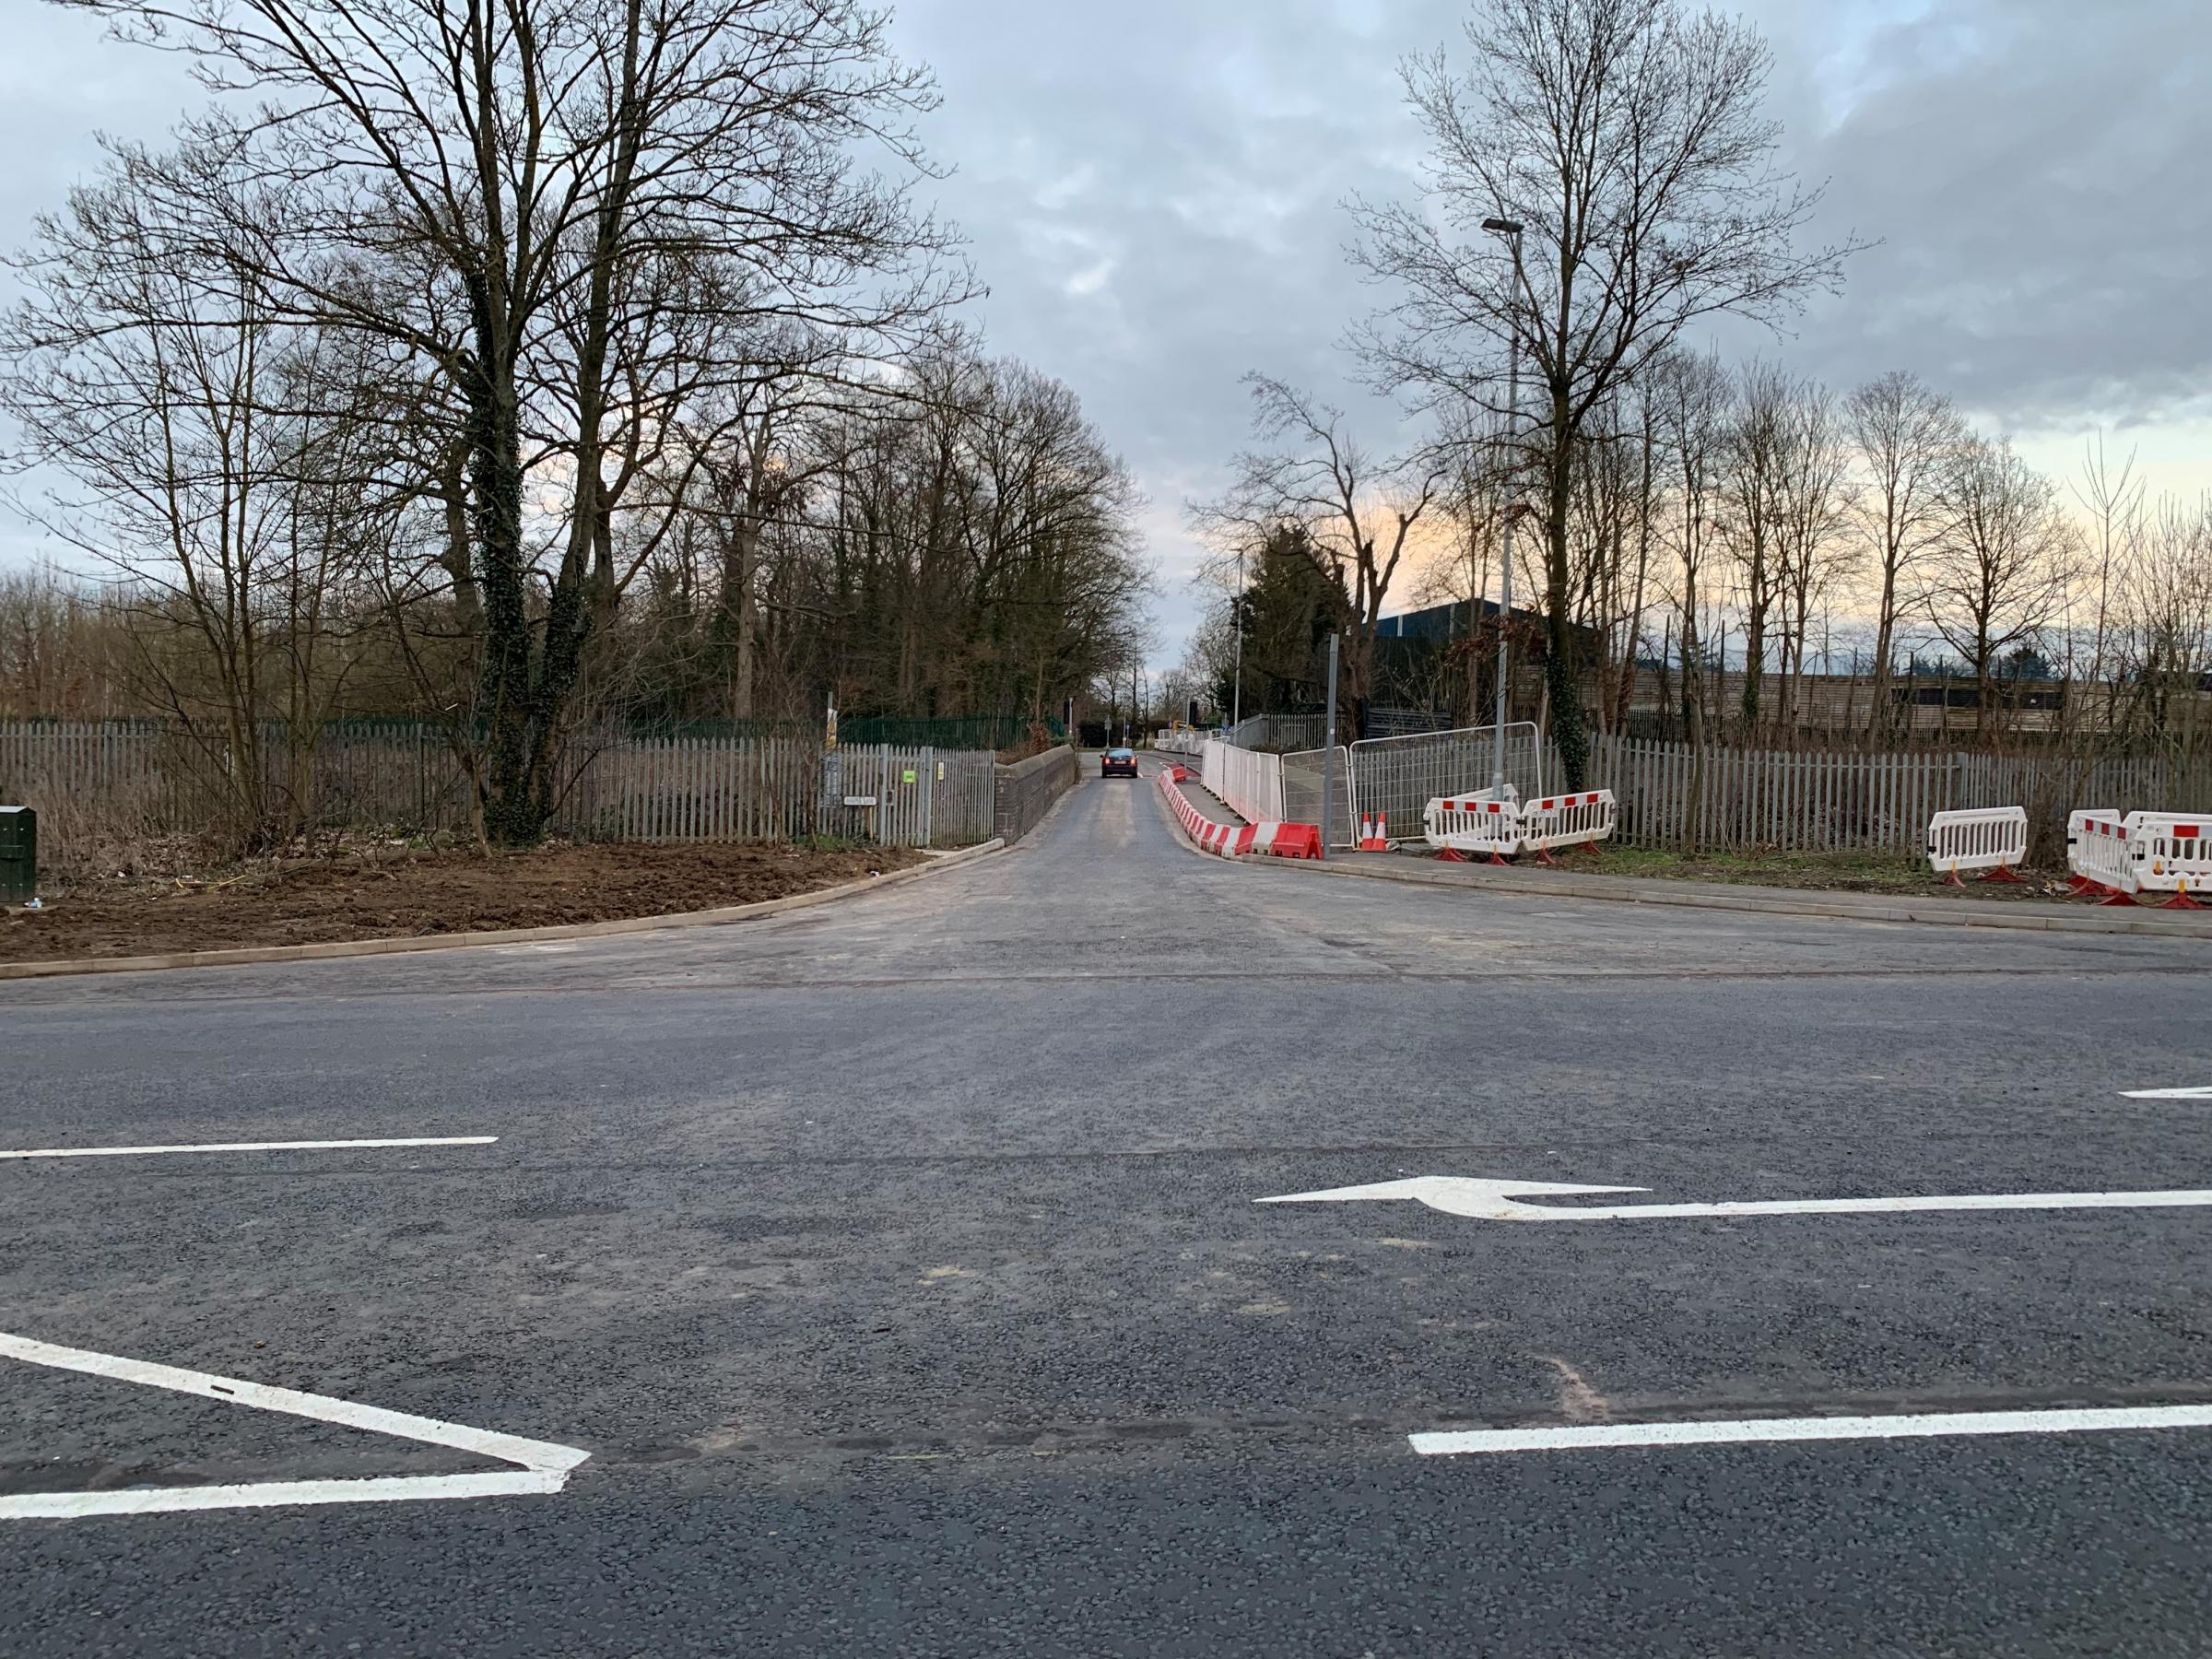 The Harper Lane bridge has become single file. There is now a closure in both directions on this bridge, as there has been for nearly seven months